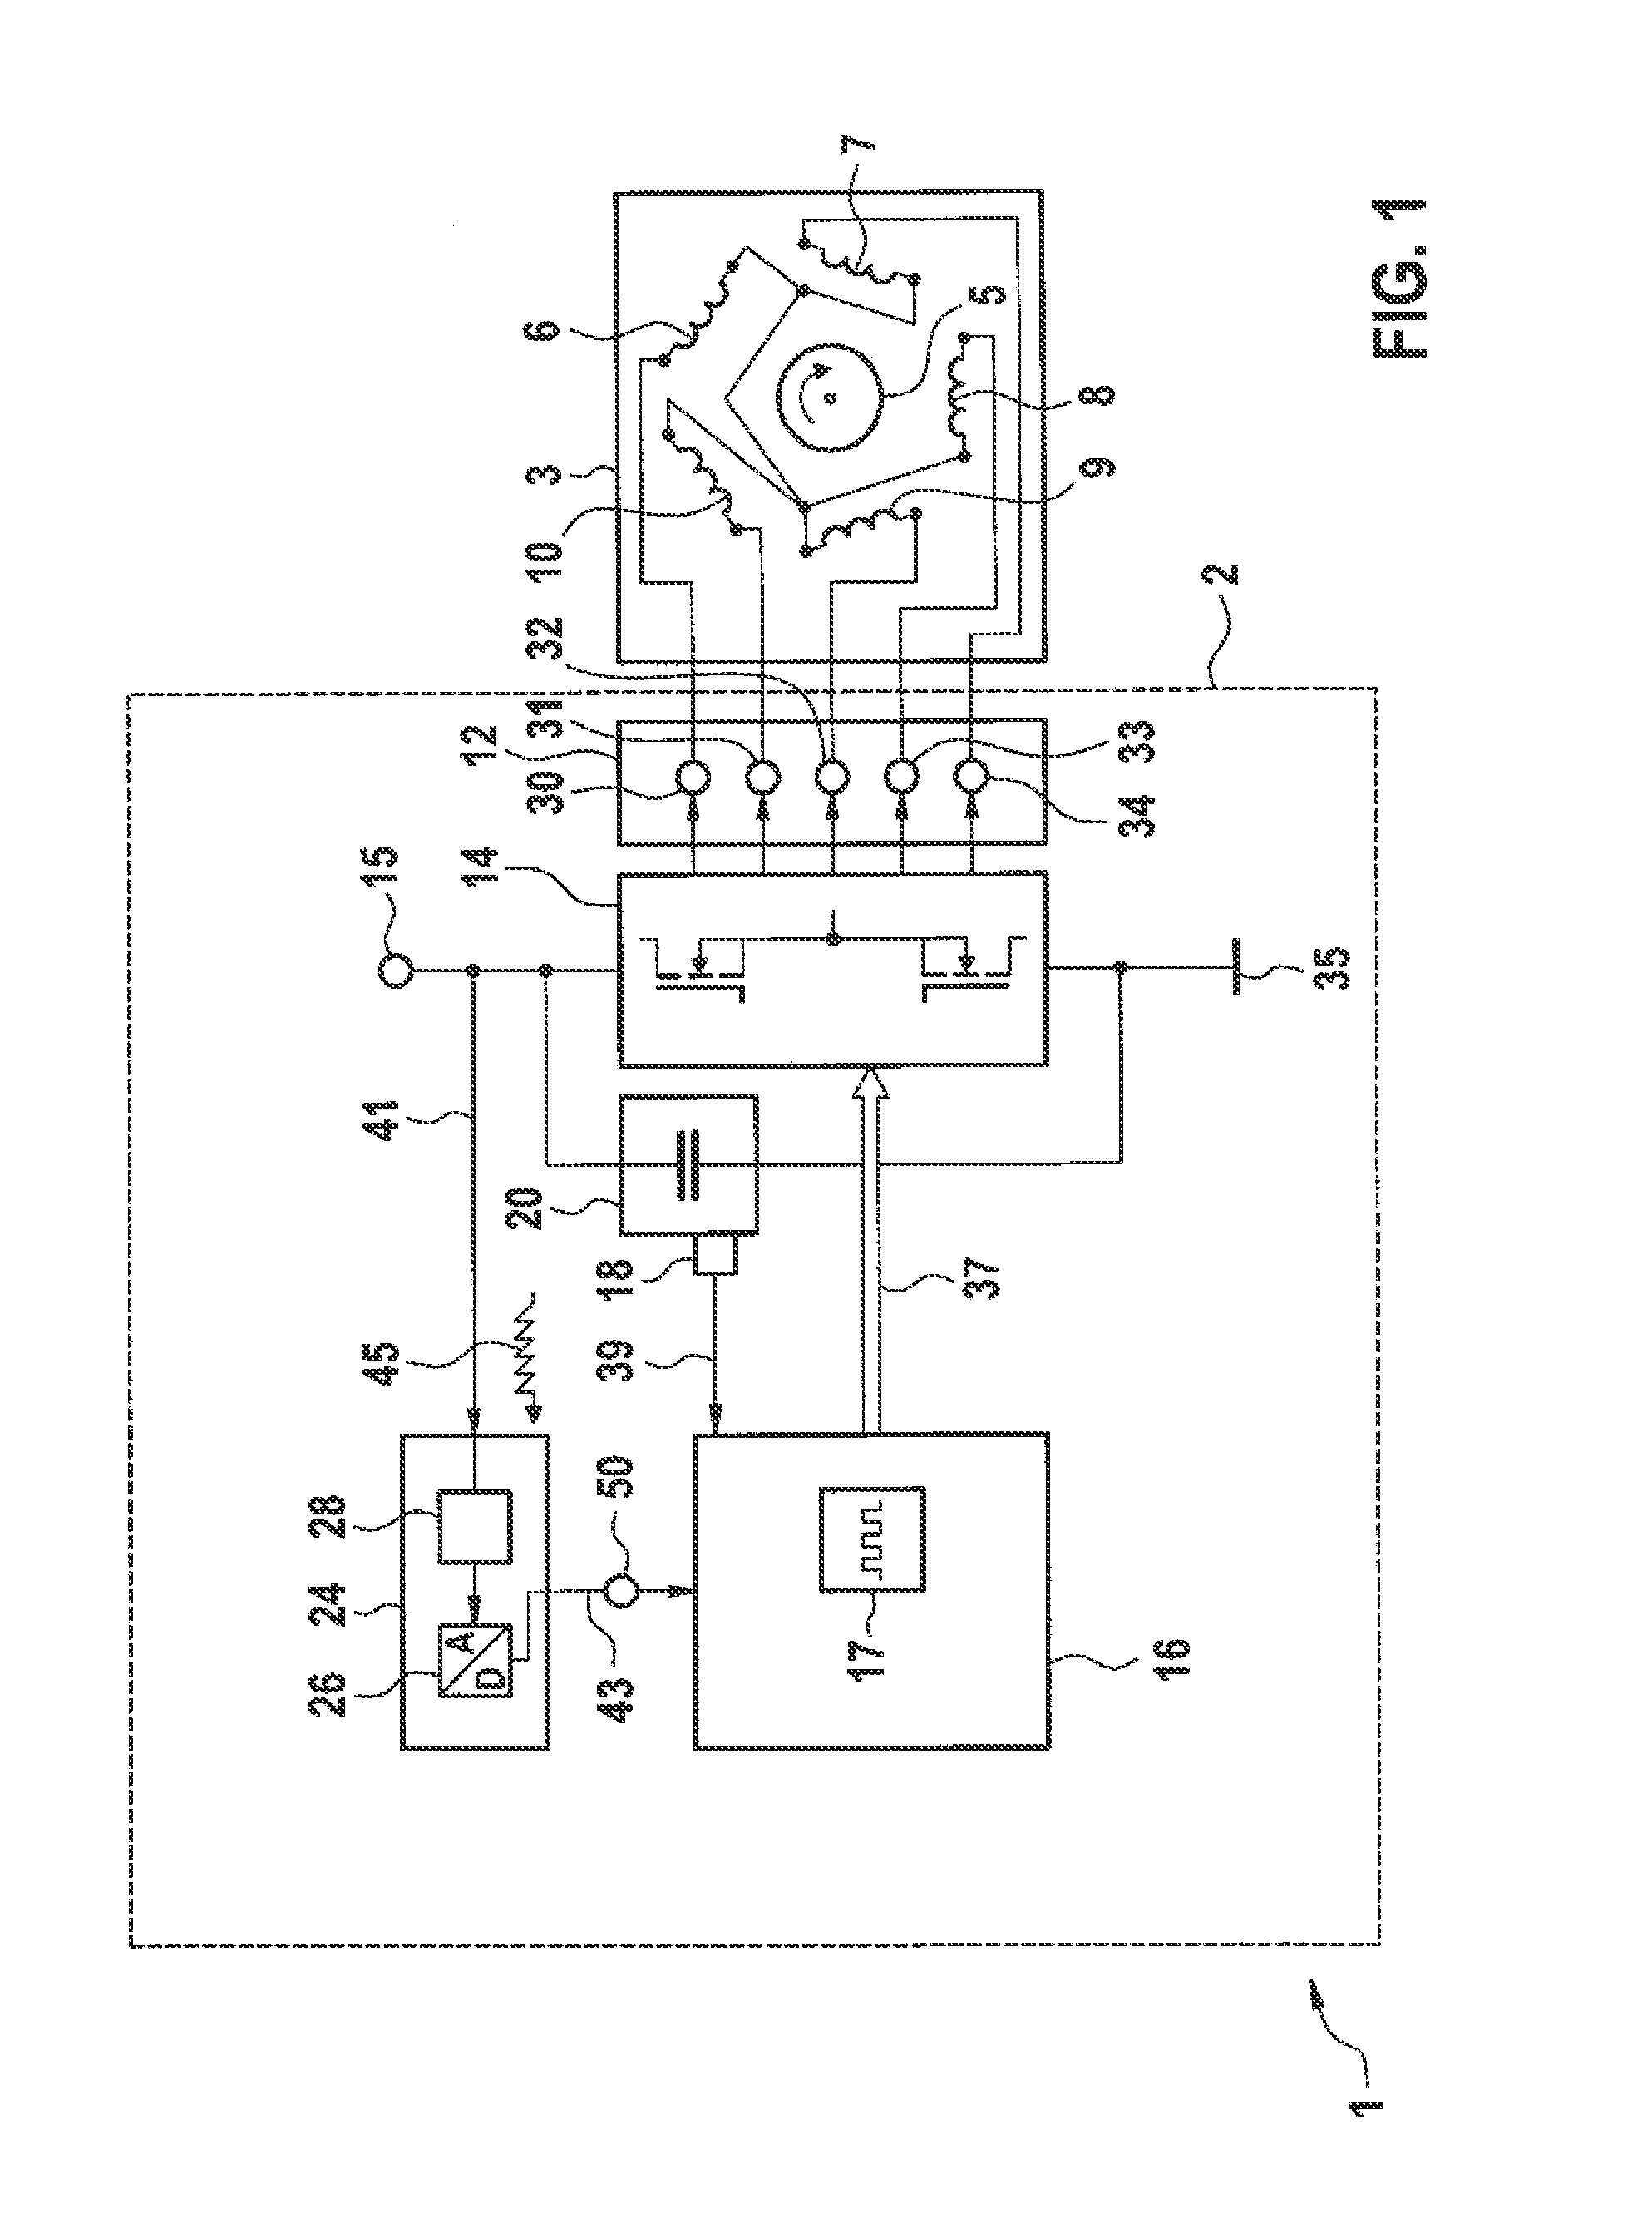 Control unit for an electric machine